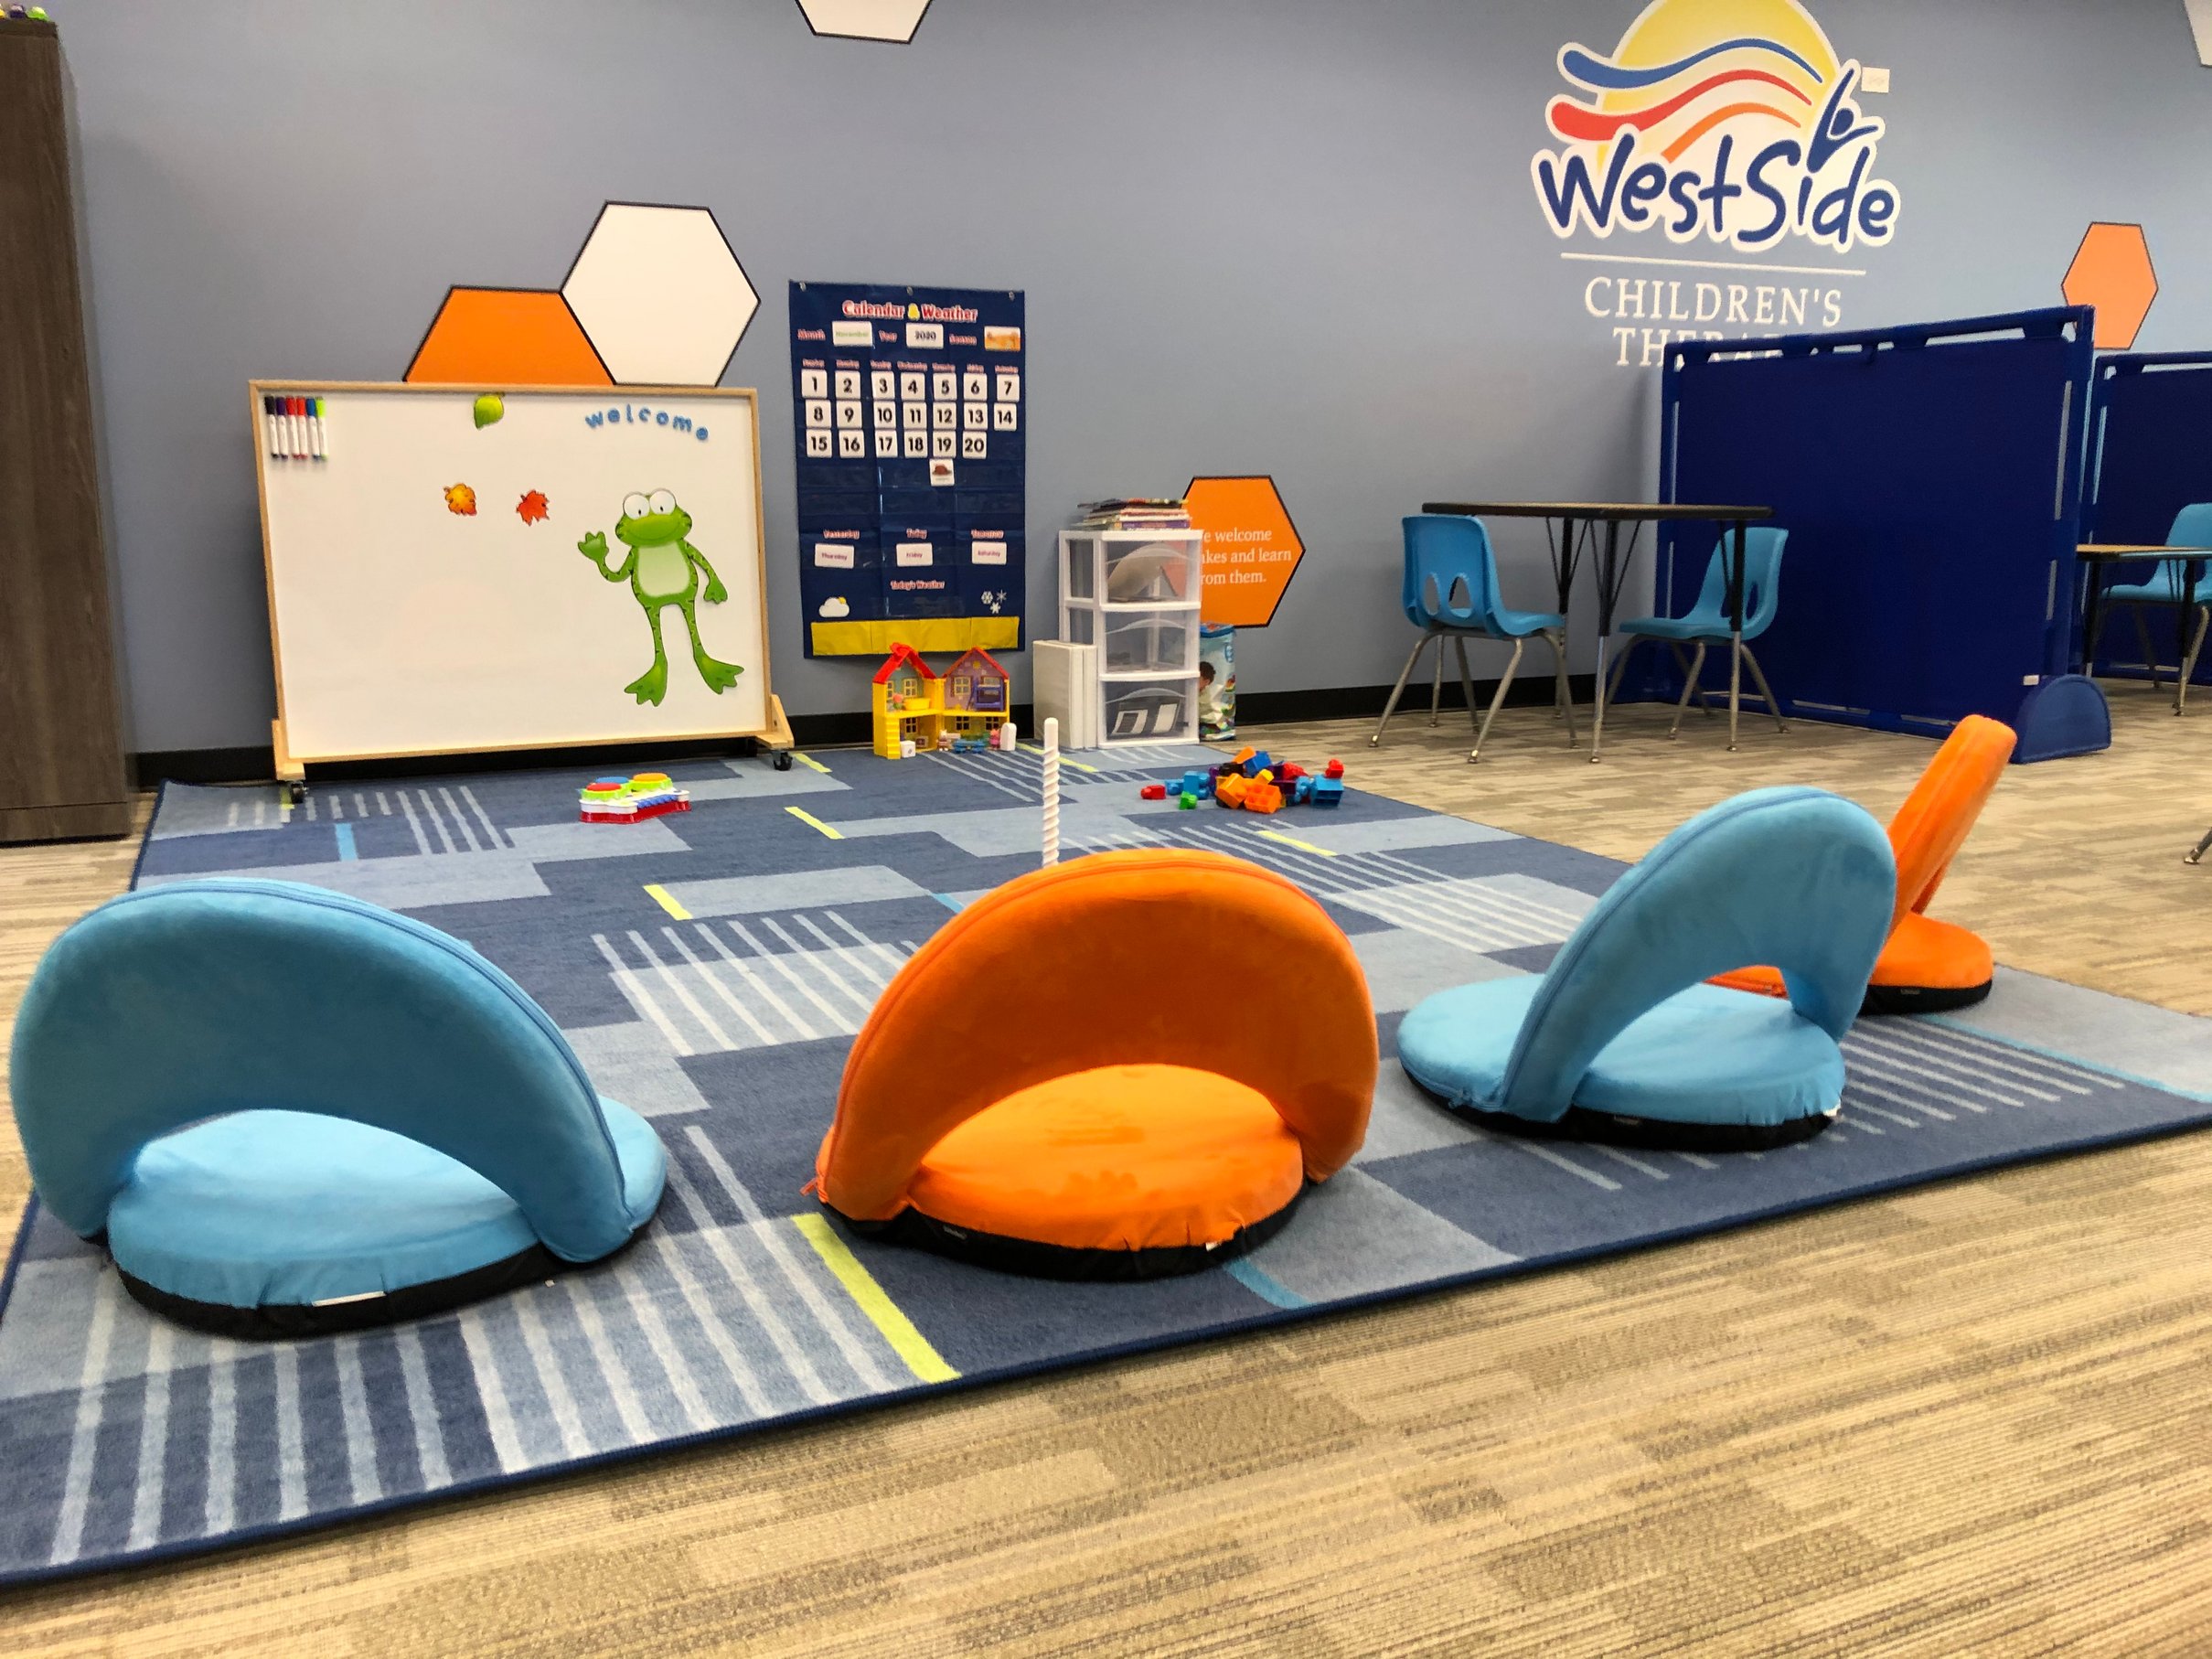 Photo of the Westside Children's Therapy activity rug in Plainfield Illinois